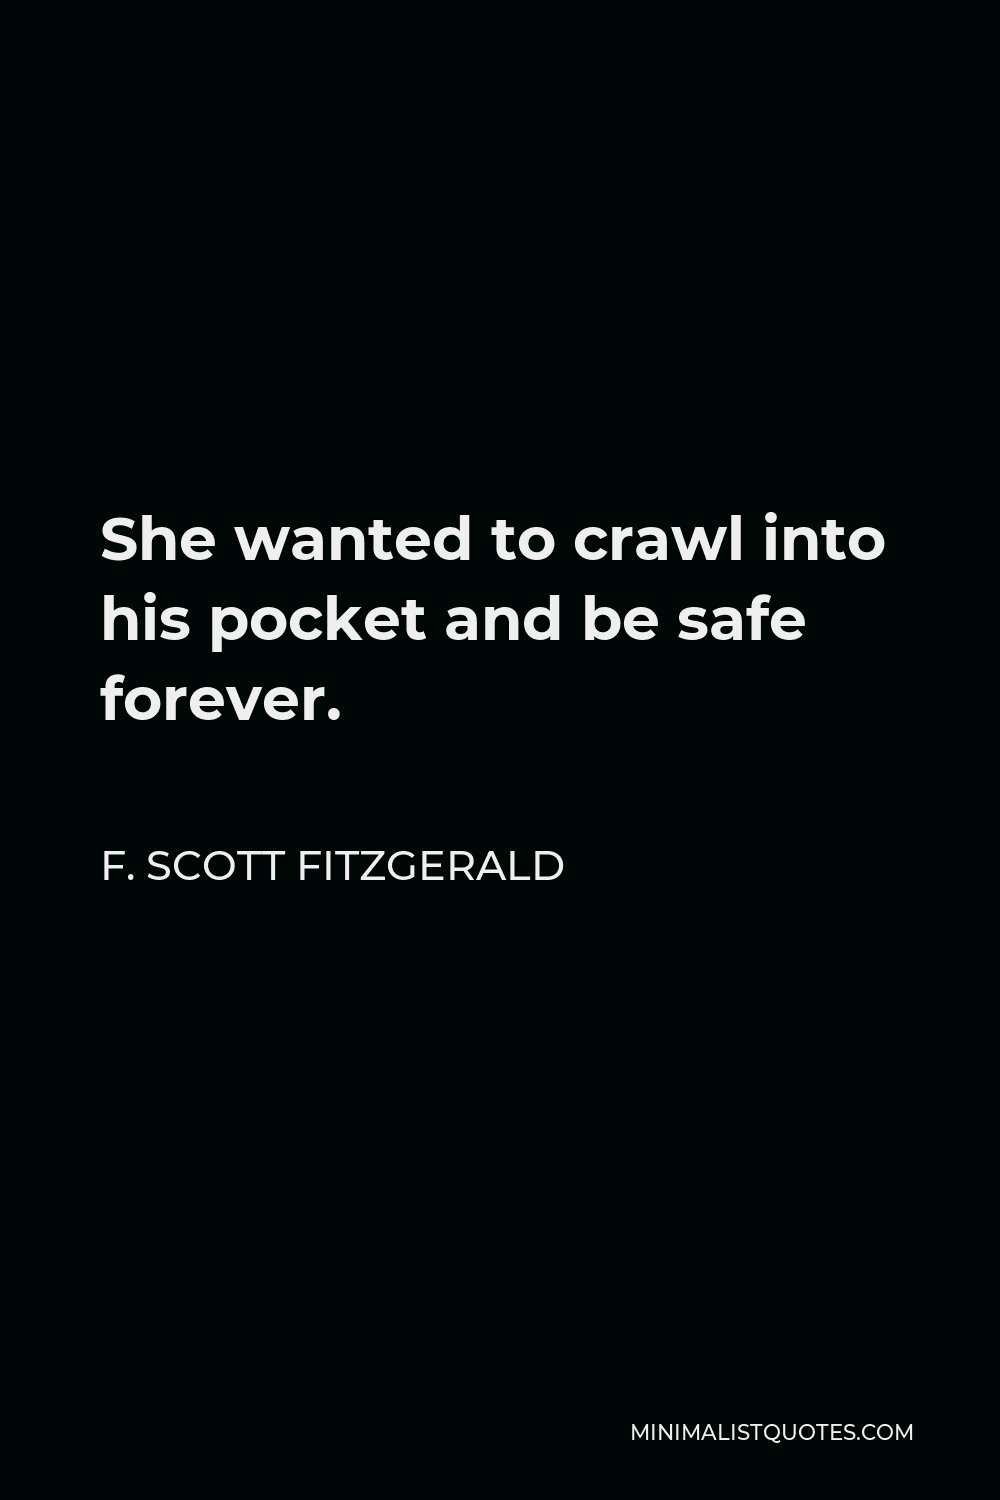 F. Scott Fitzgerald Quote - She wanted to crawl into his pocket and be safe forever.